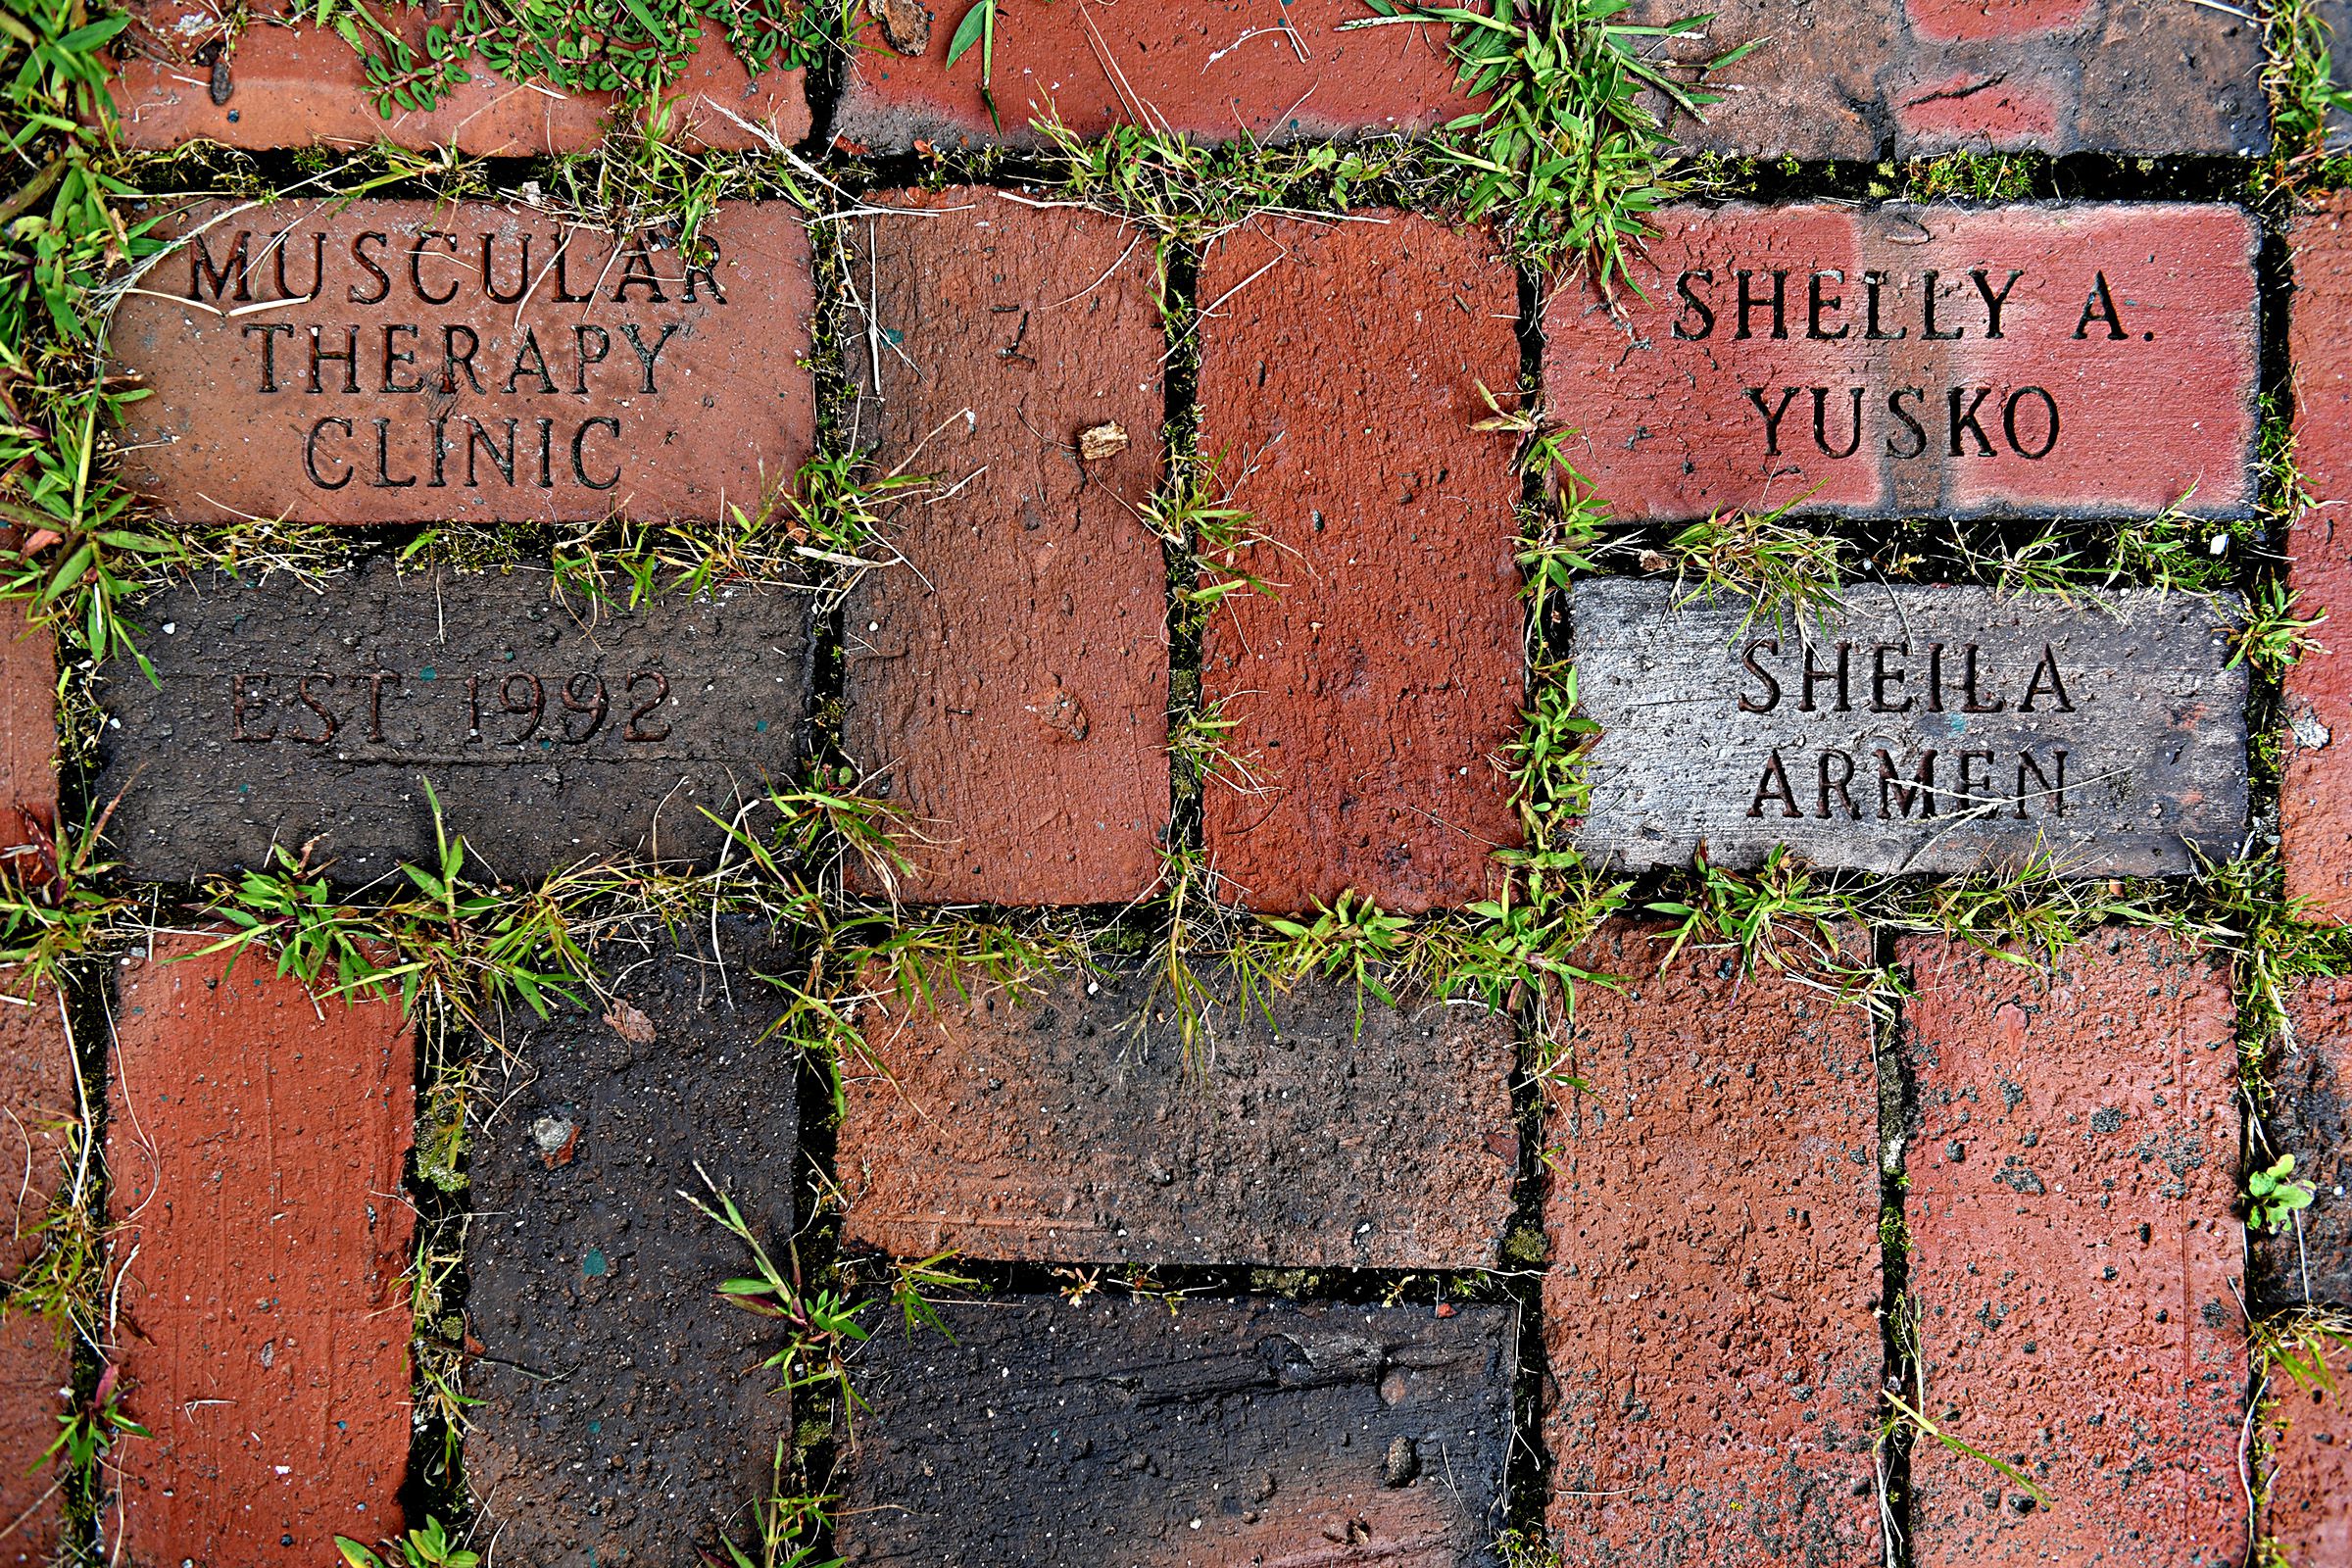 Sheila Armen’s and Shelly Yusko’s names adorn the path leading to Strong House Spa in Quechee, Vt., on Aug. 24, 2017.  (Valley News - Jennifer Hauck) Copyright Valley News. May not be reprinted or used online without permission. Send requests to permission@vnews.com.